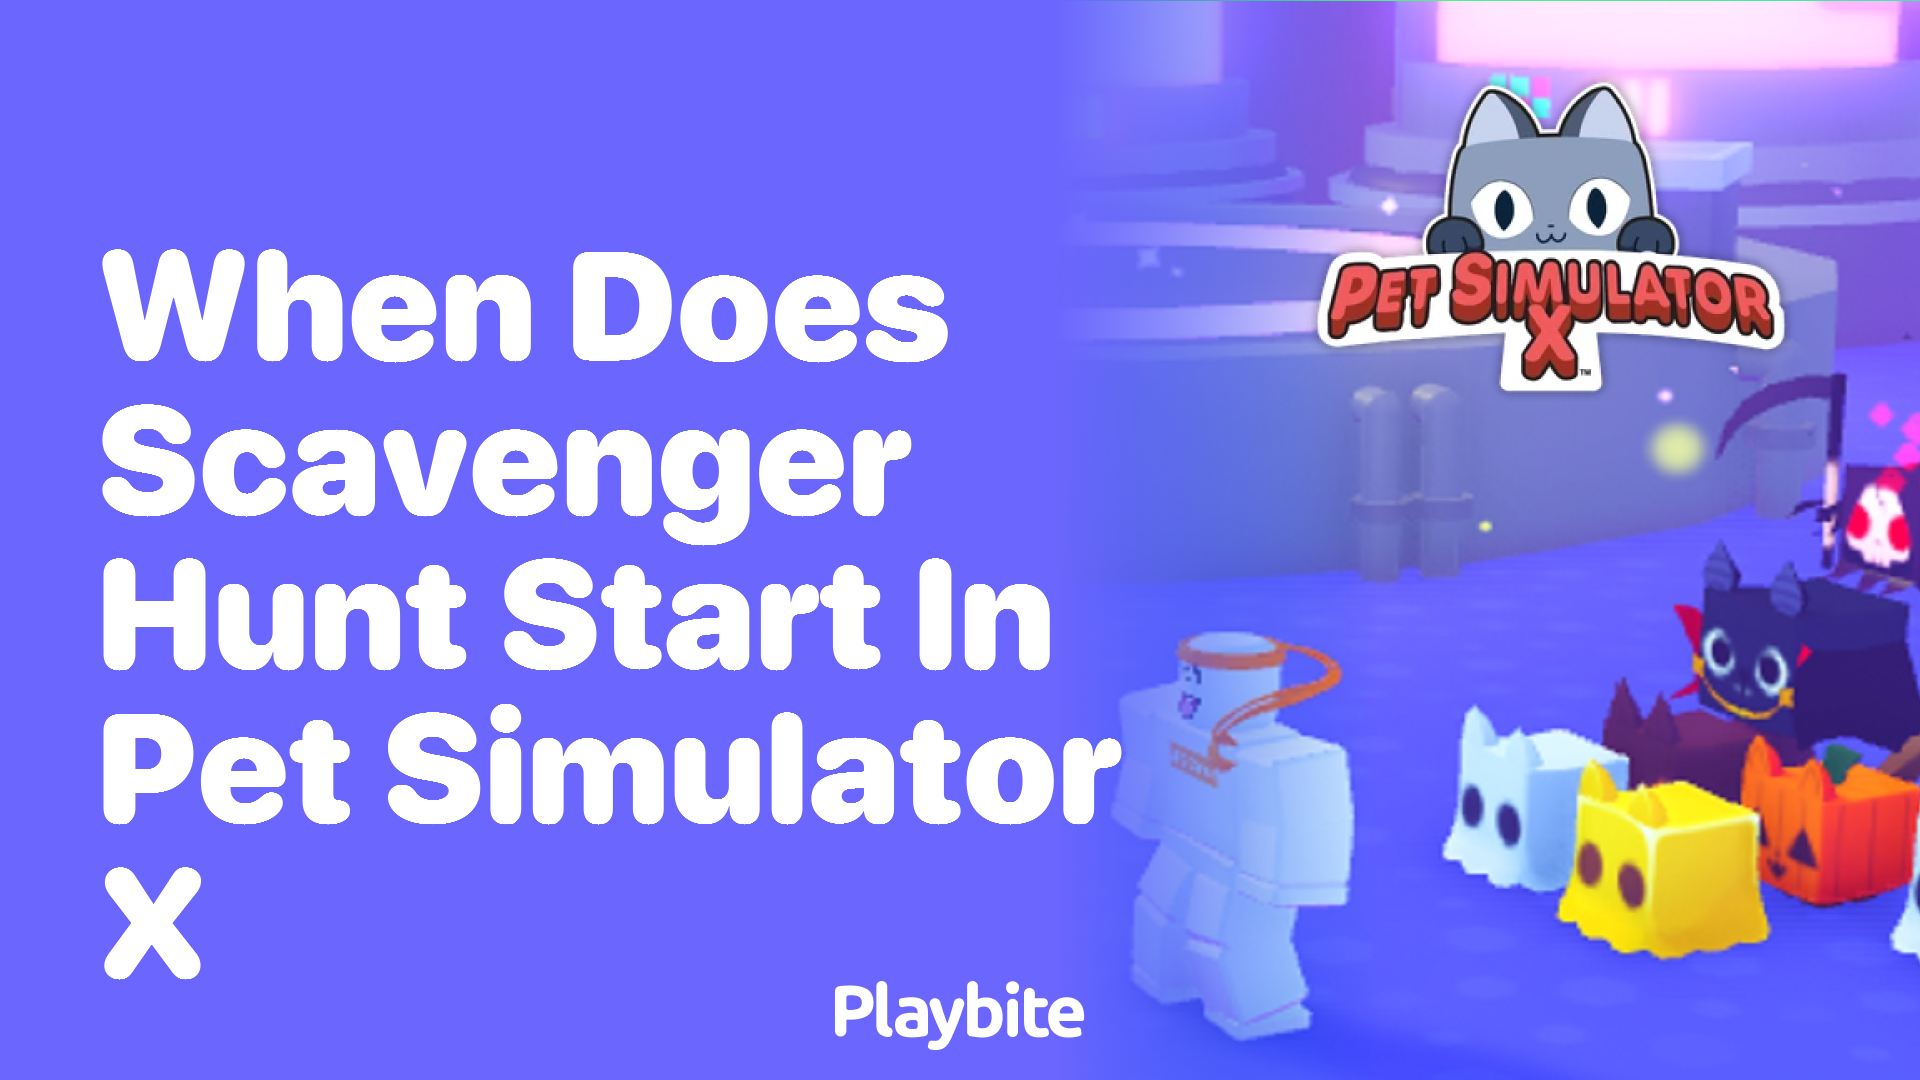 When does the Scavenger Hunt start in Pet Simulator X?